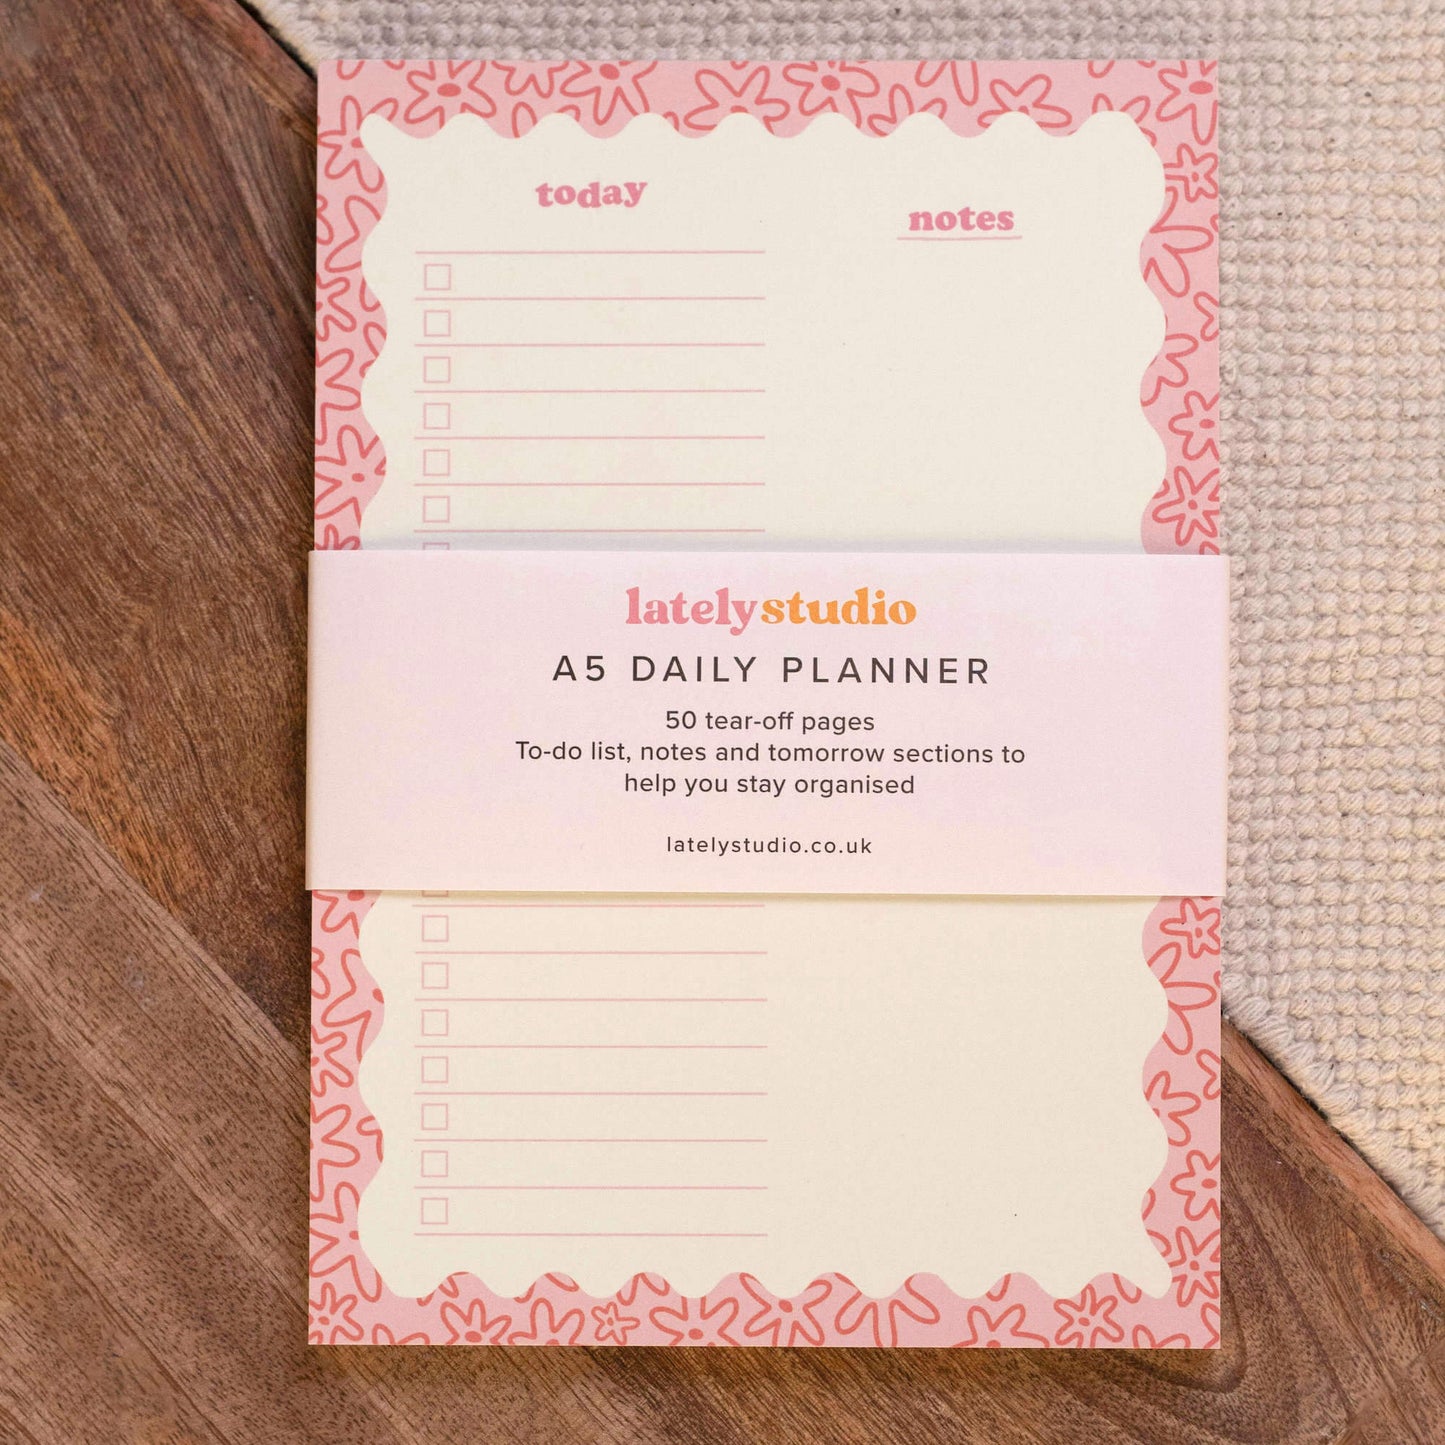 A5 Wavy Floral Daily Desk Pad